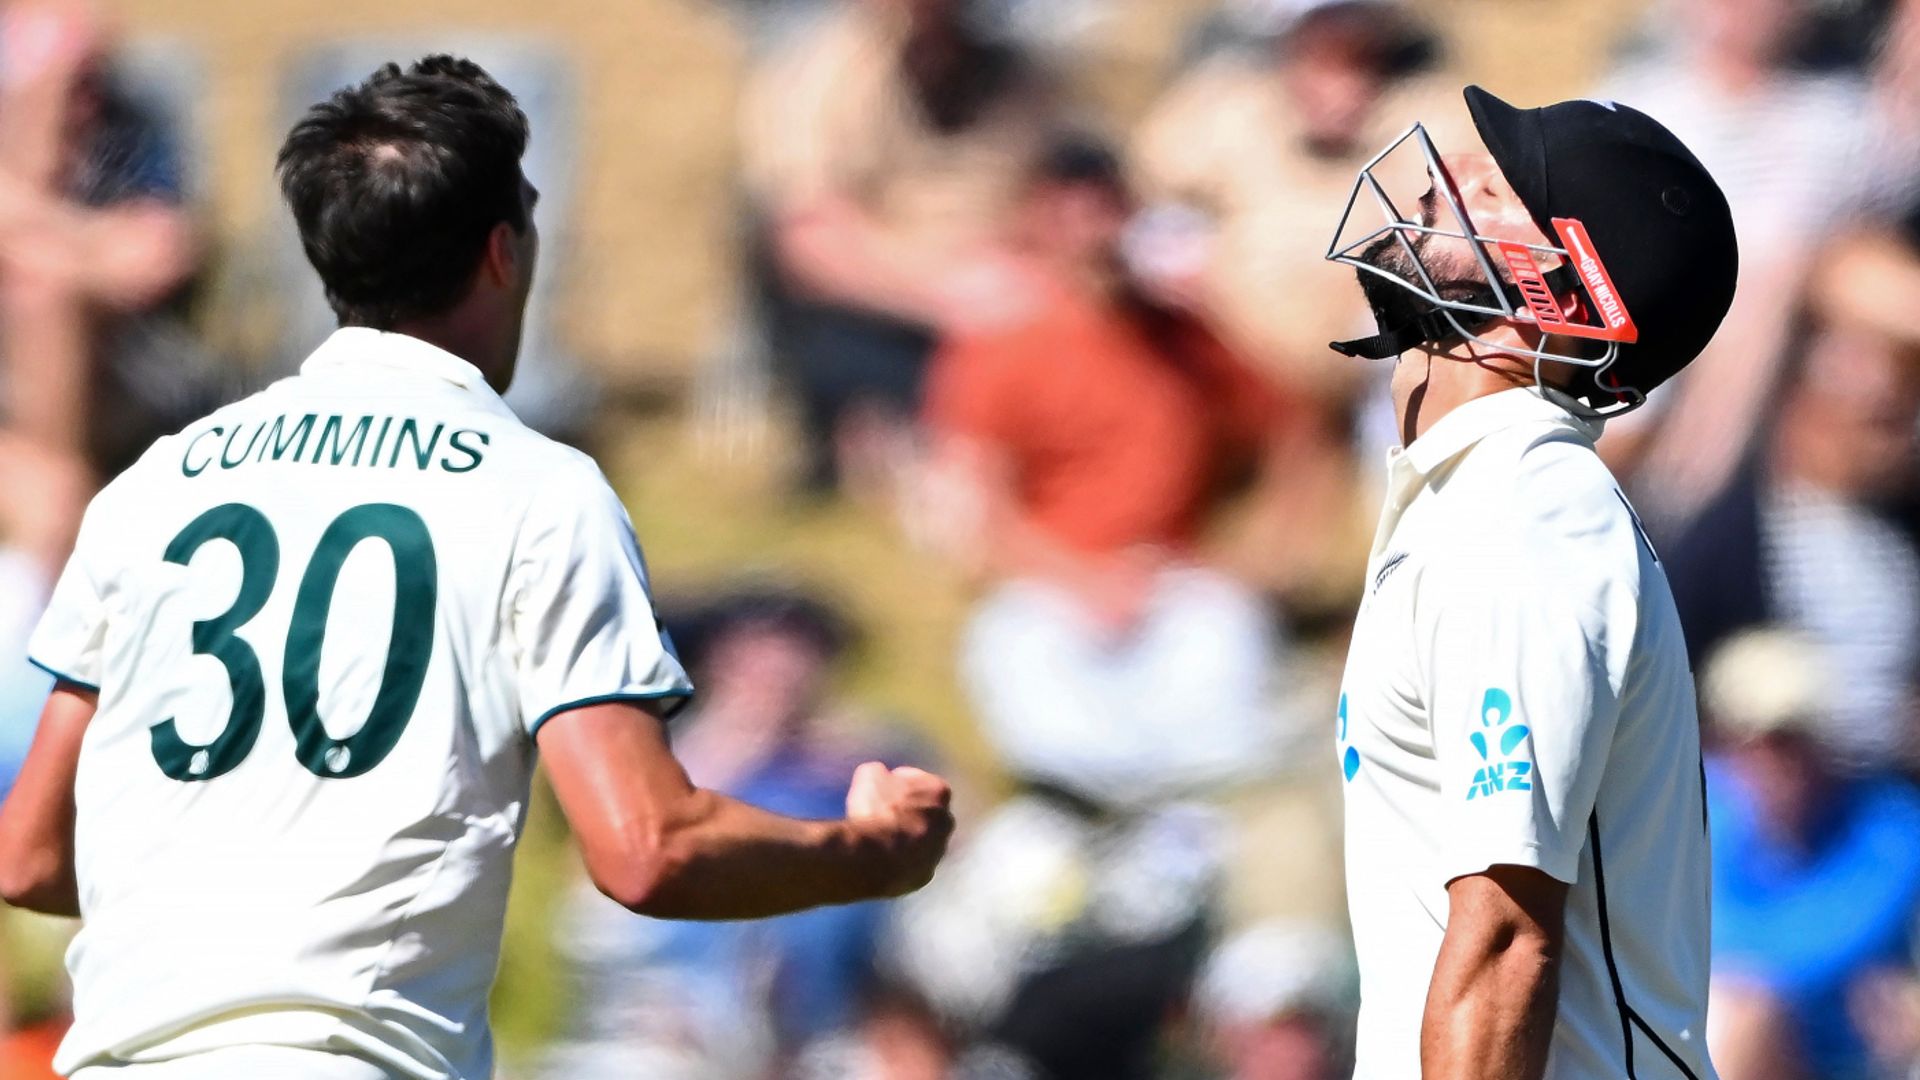 Black Caps collapse as Australia take control of first Test